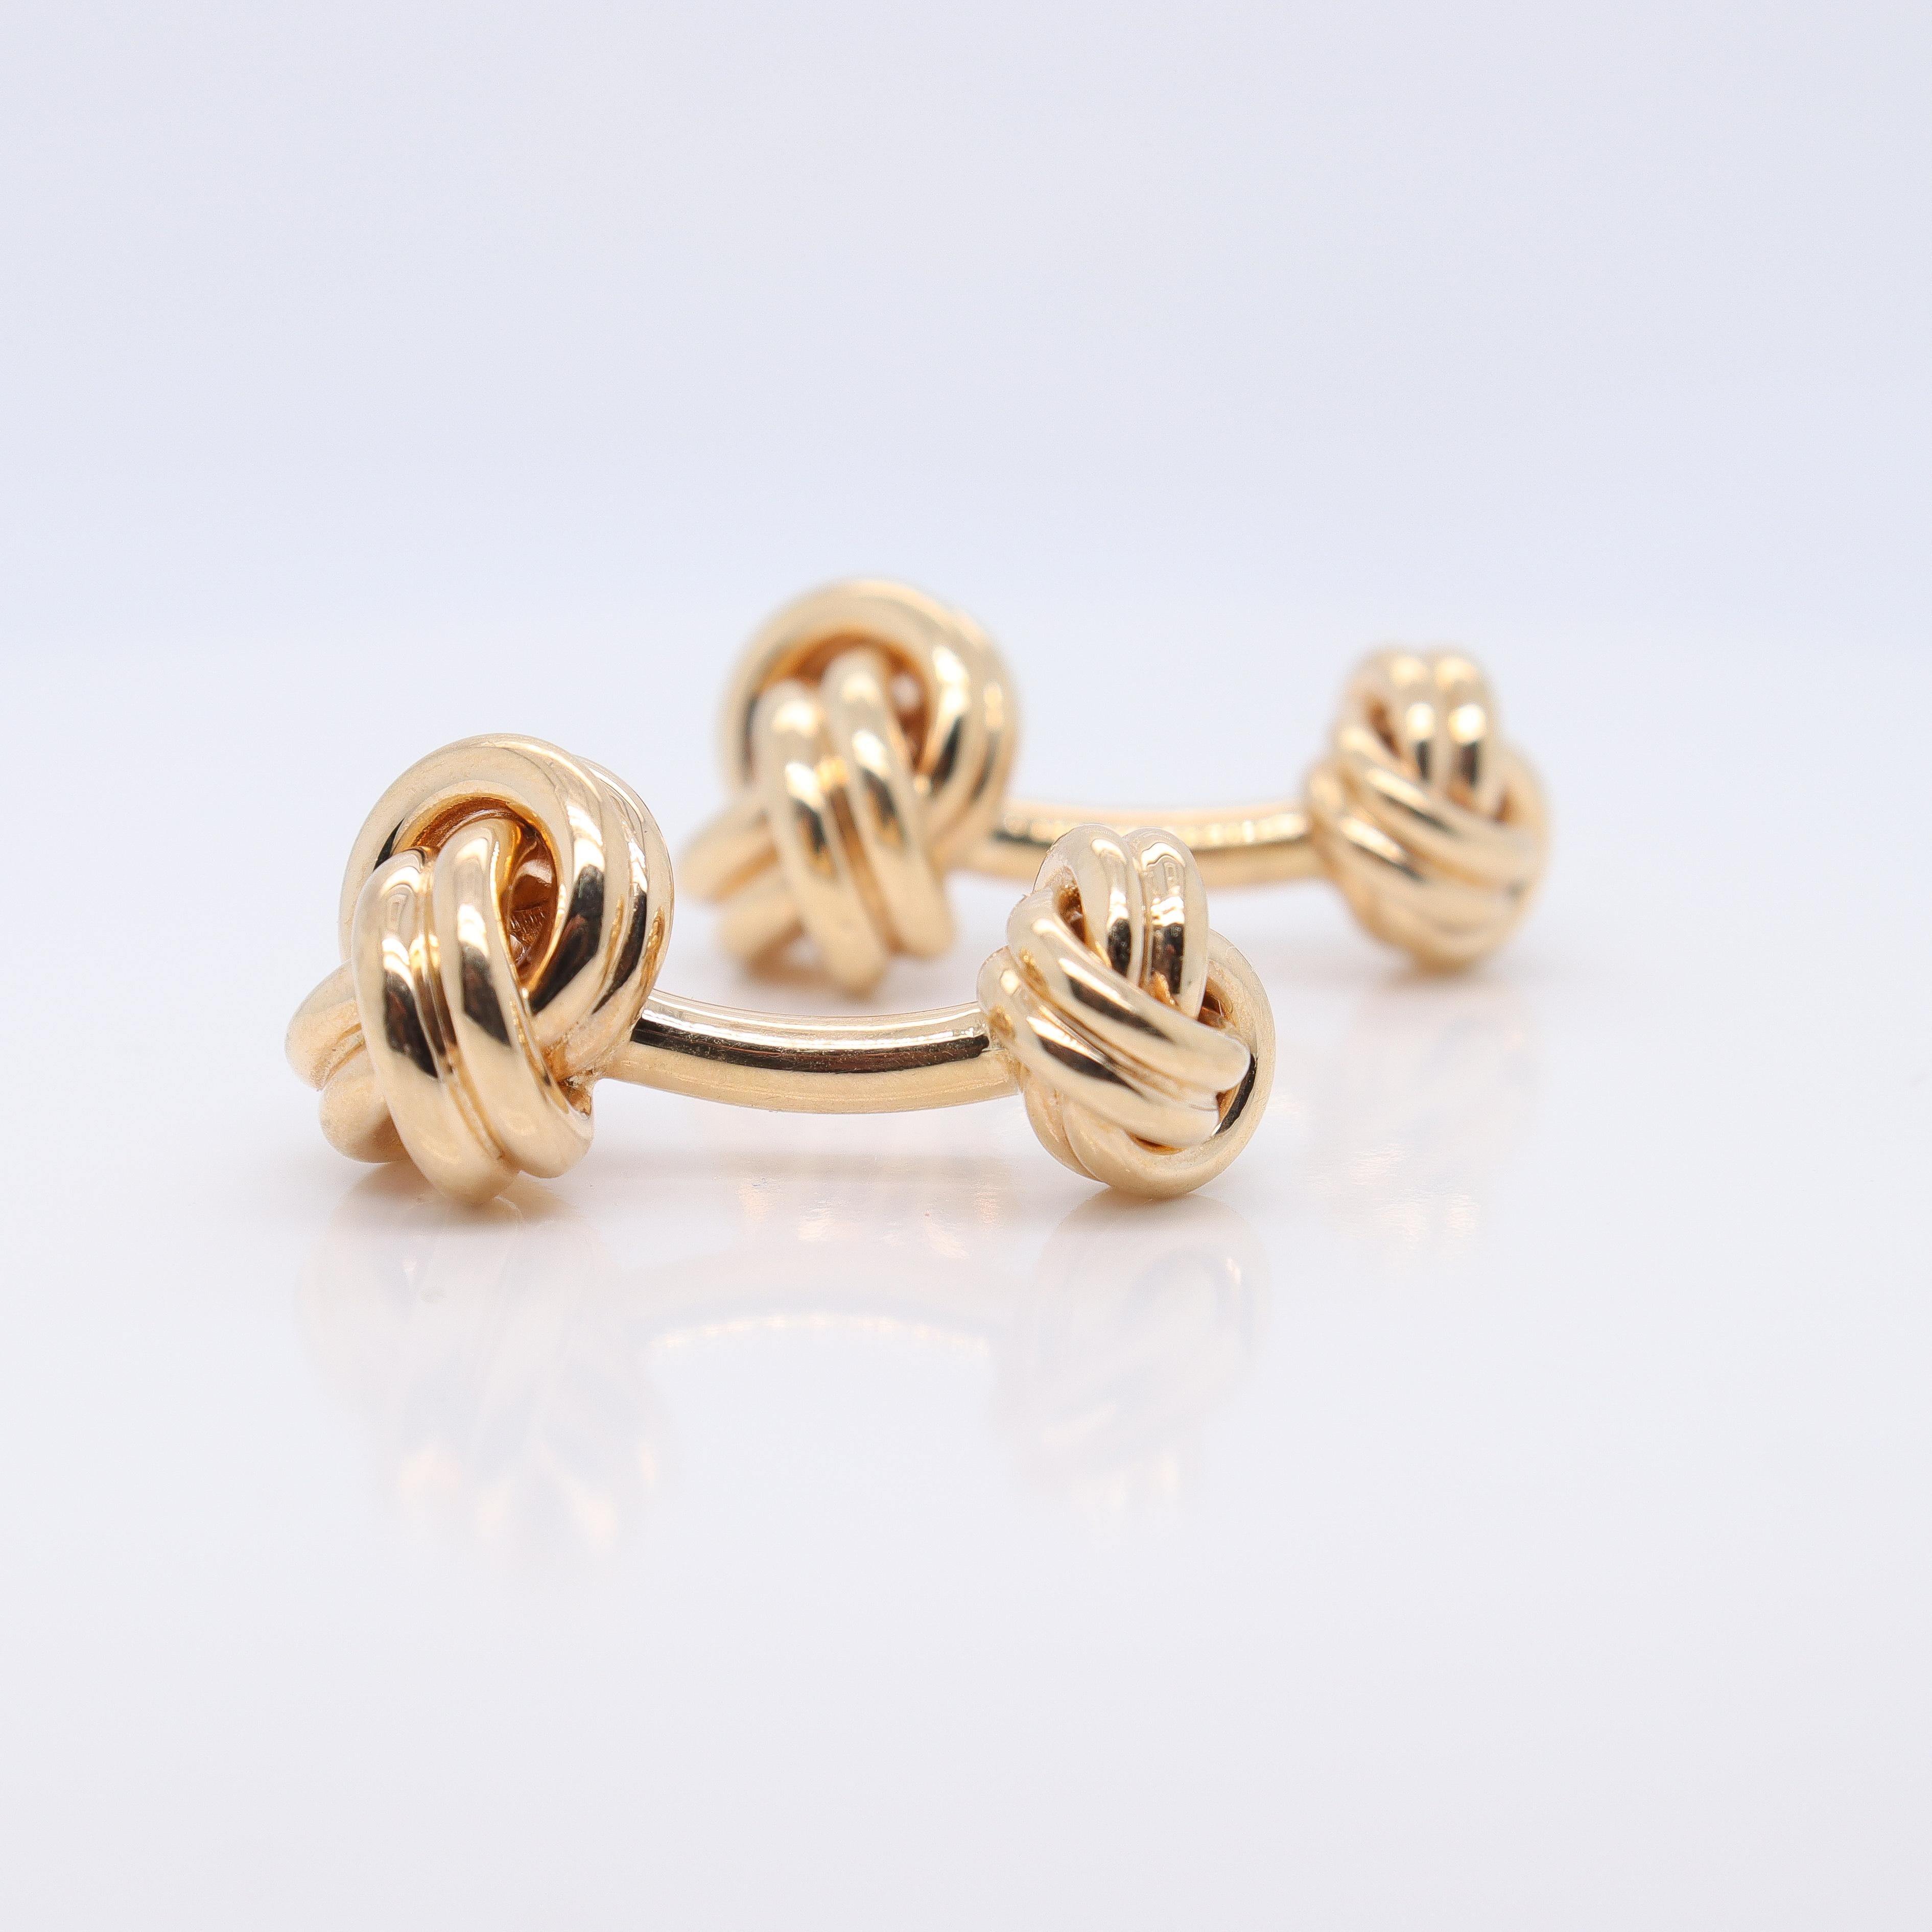 Modern Pair of Tiffany & Co. 14k Gold Double Love Knot Cufflinks